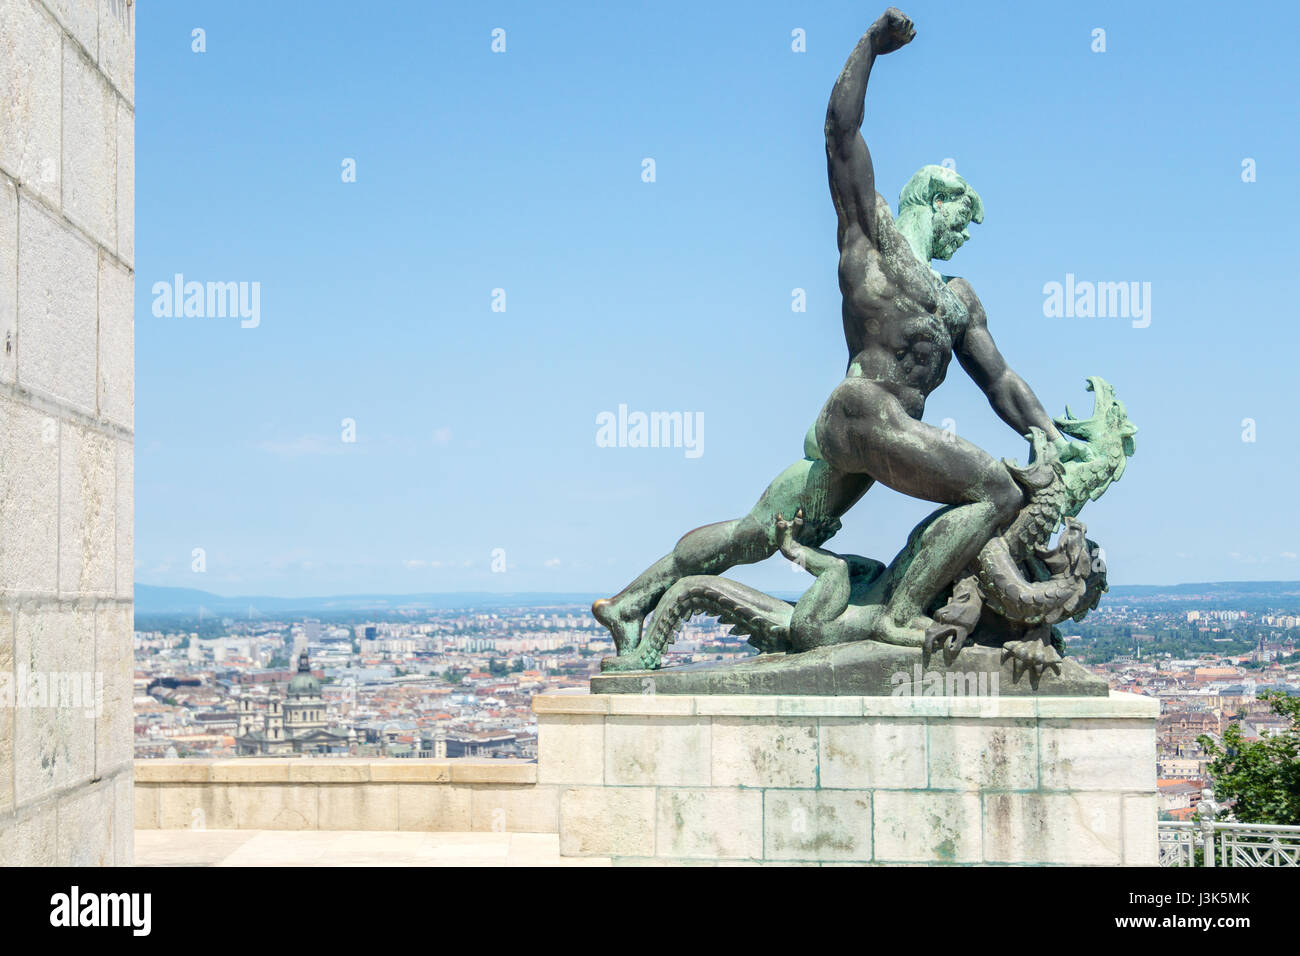 One of the two smaller statues on Gellert Hill, that sit at the foot of the Liberty Statue, in Budapest, Hungary, this one of a man slaying a dragon,  Stock Photo